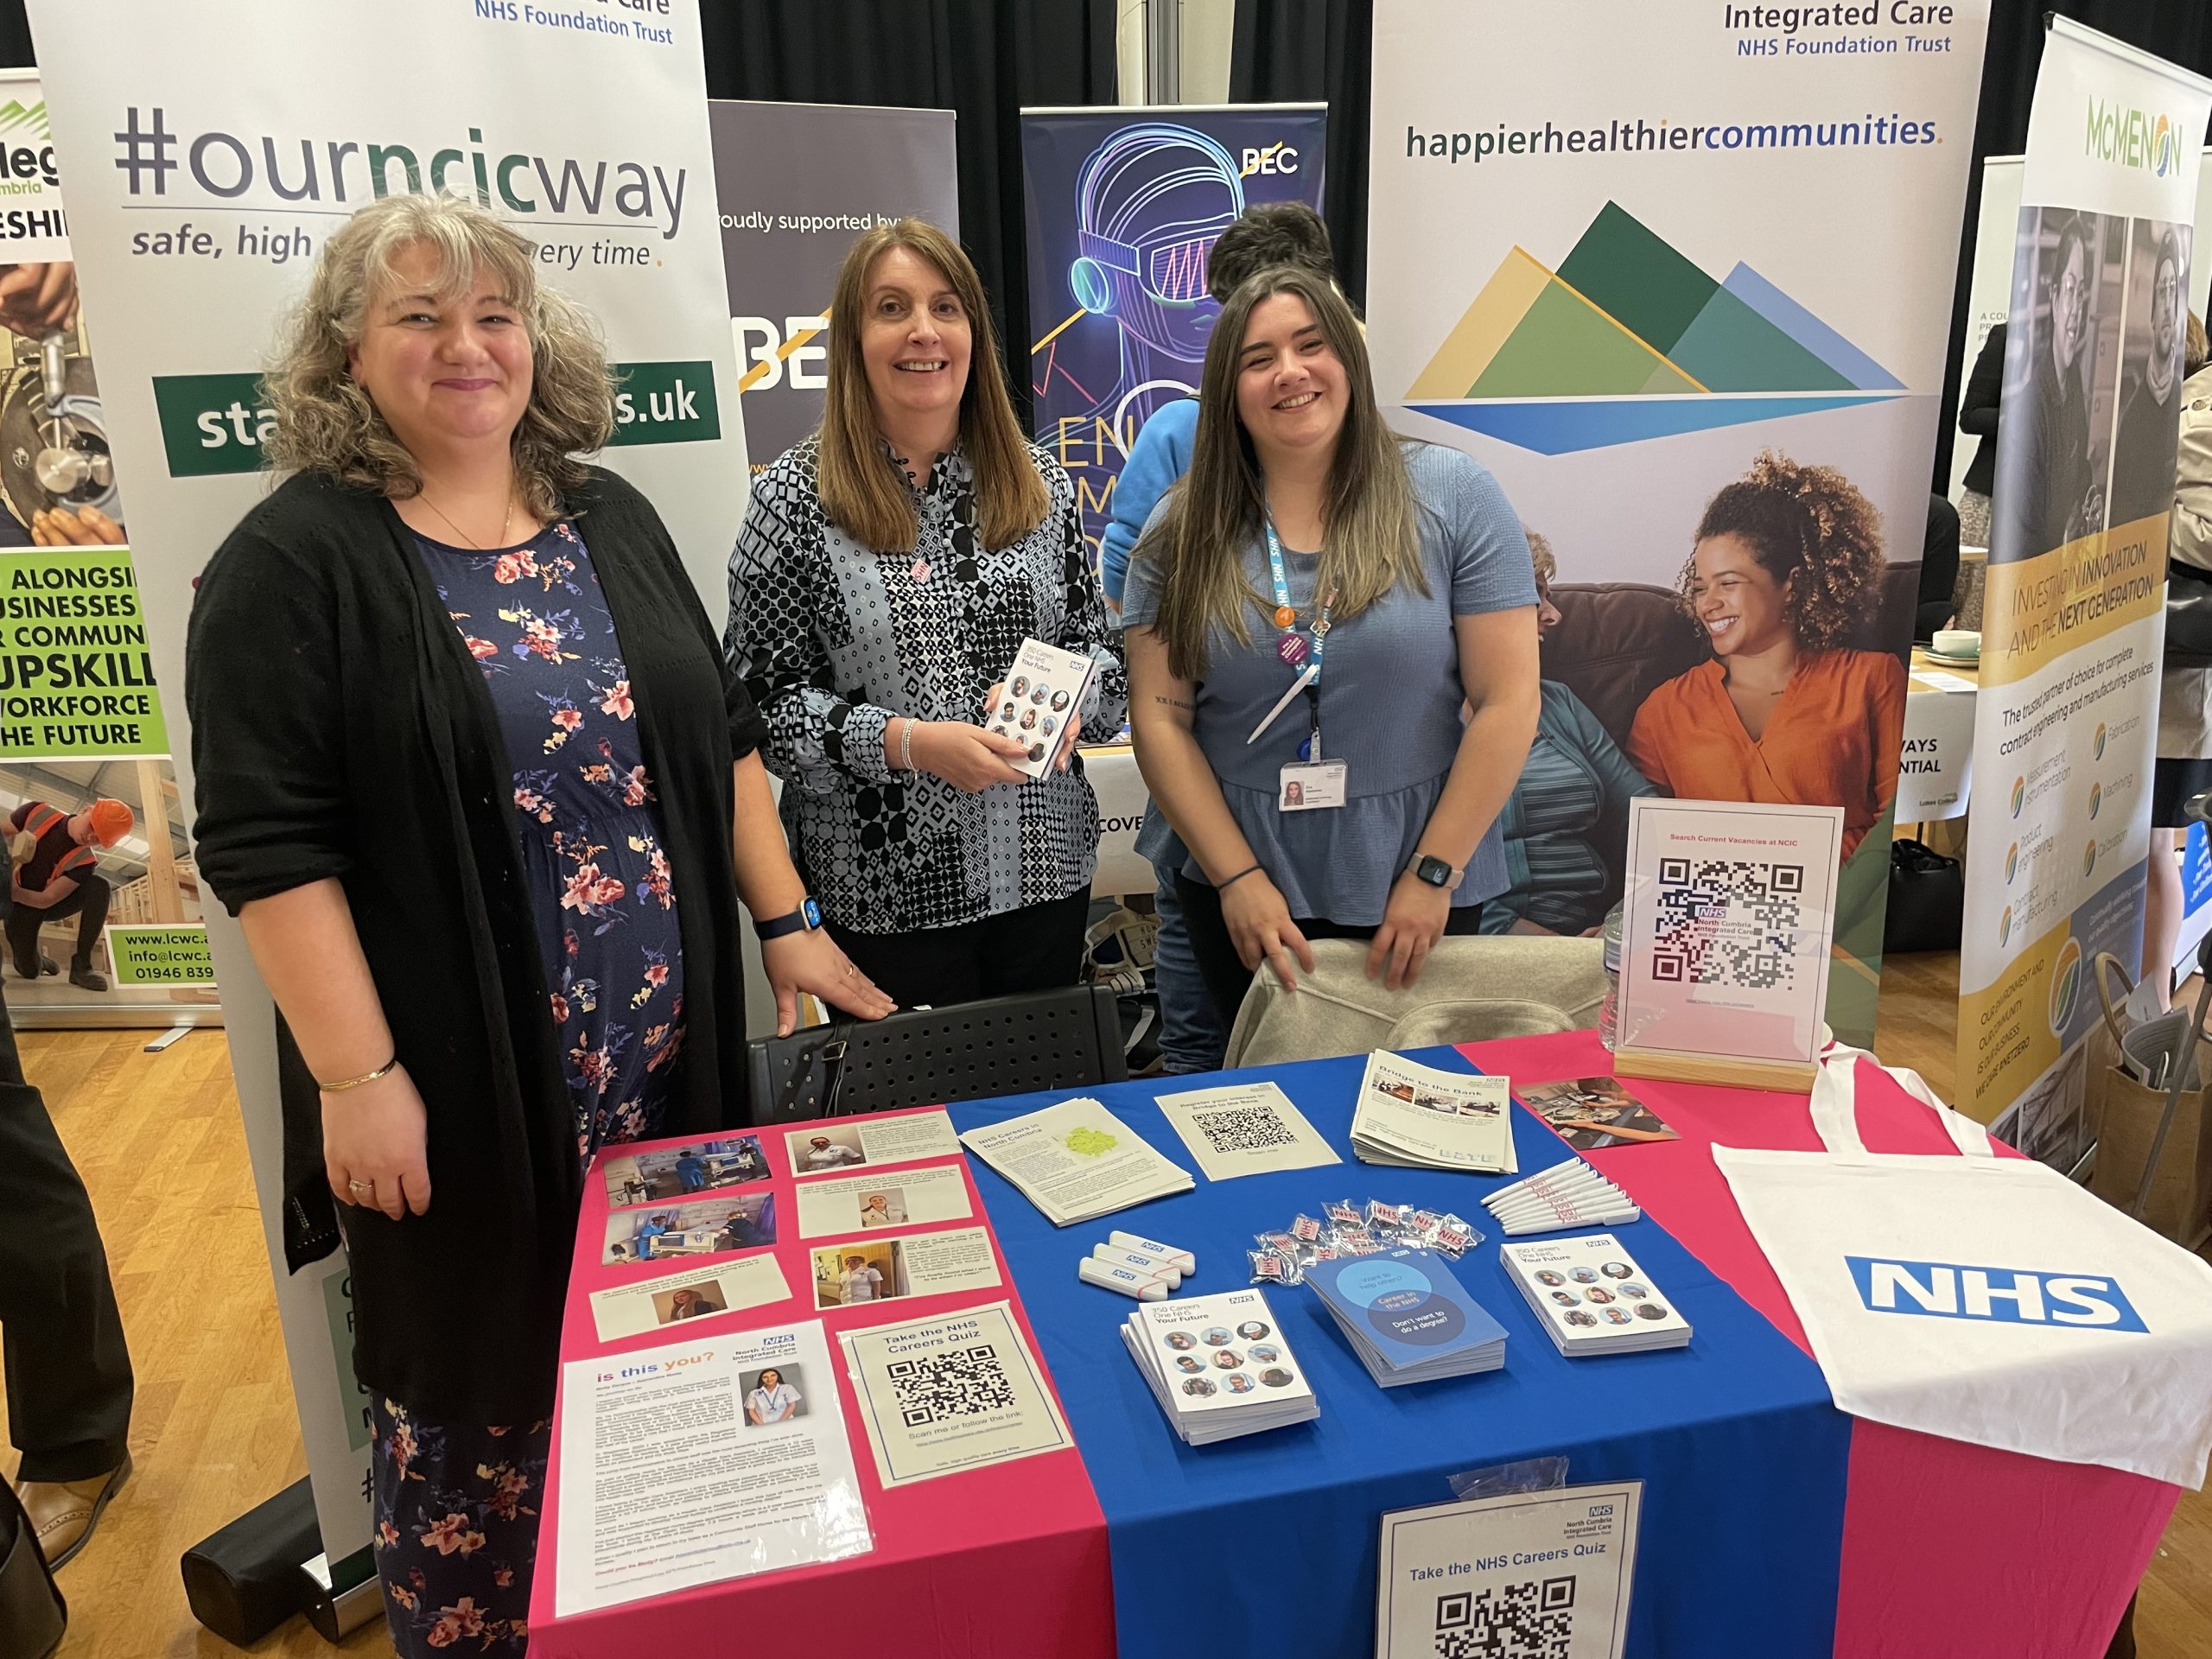 North Cumbria Integrated Care NHS Foundation Trust at Lakes College's Employer and Careers Fair